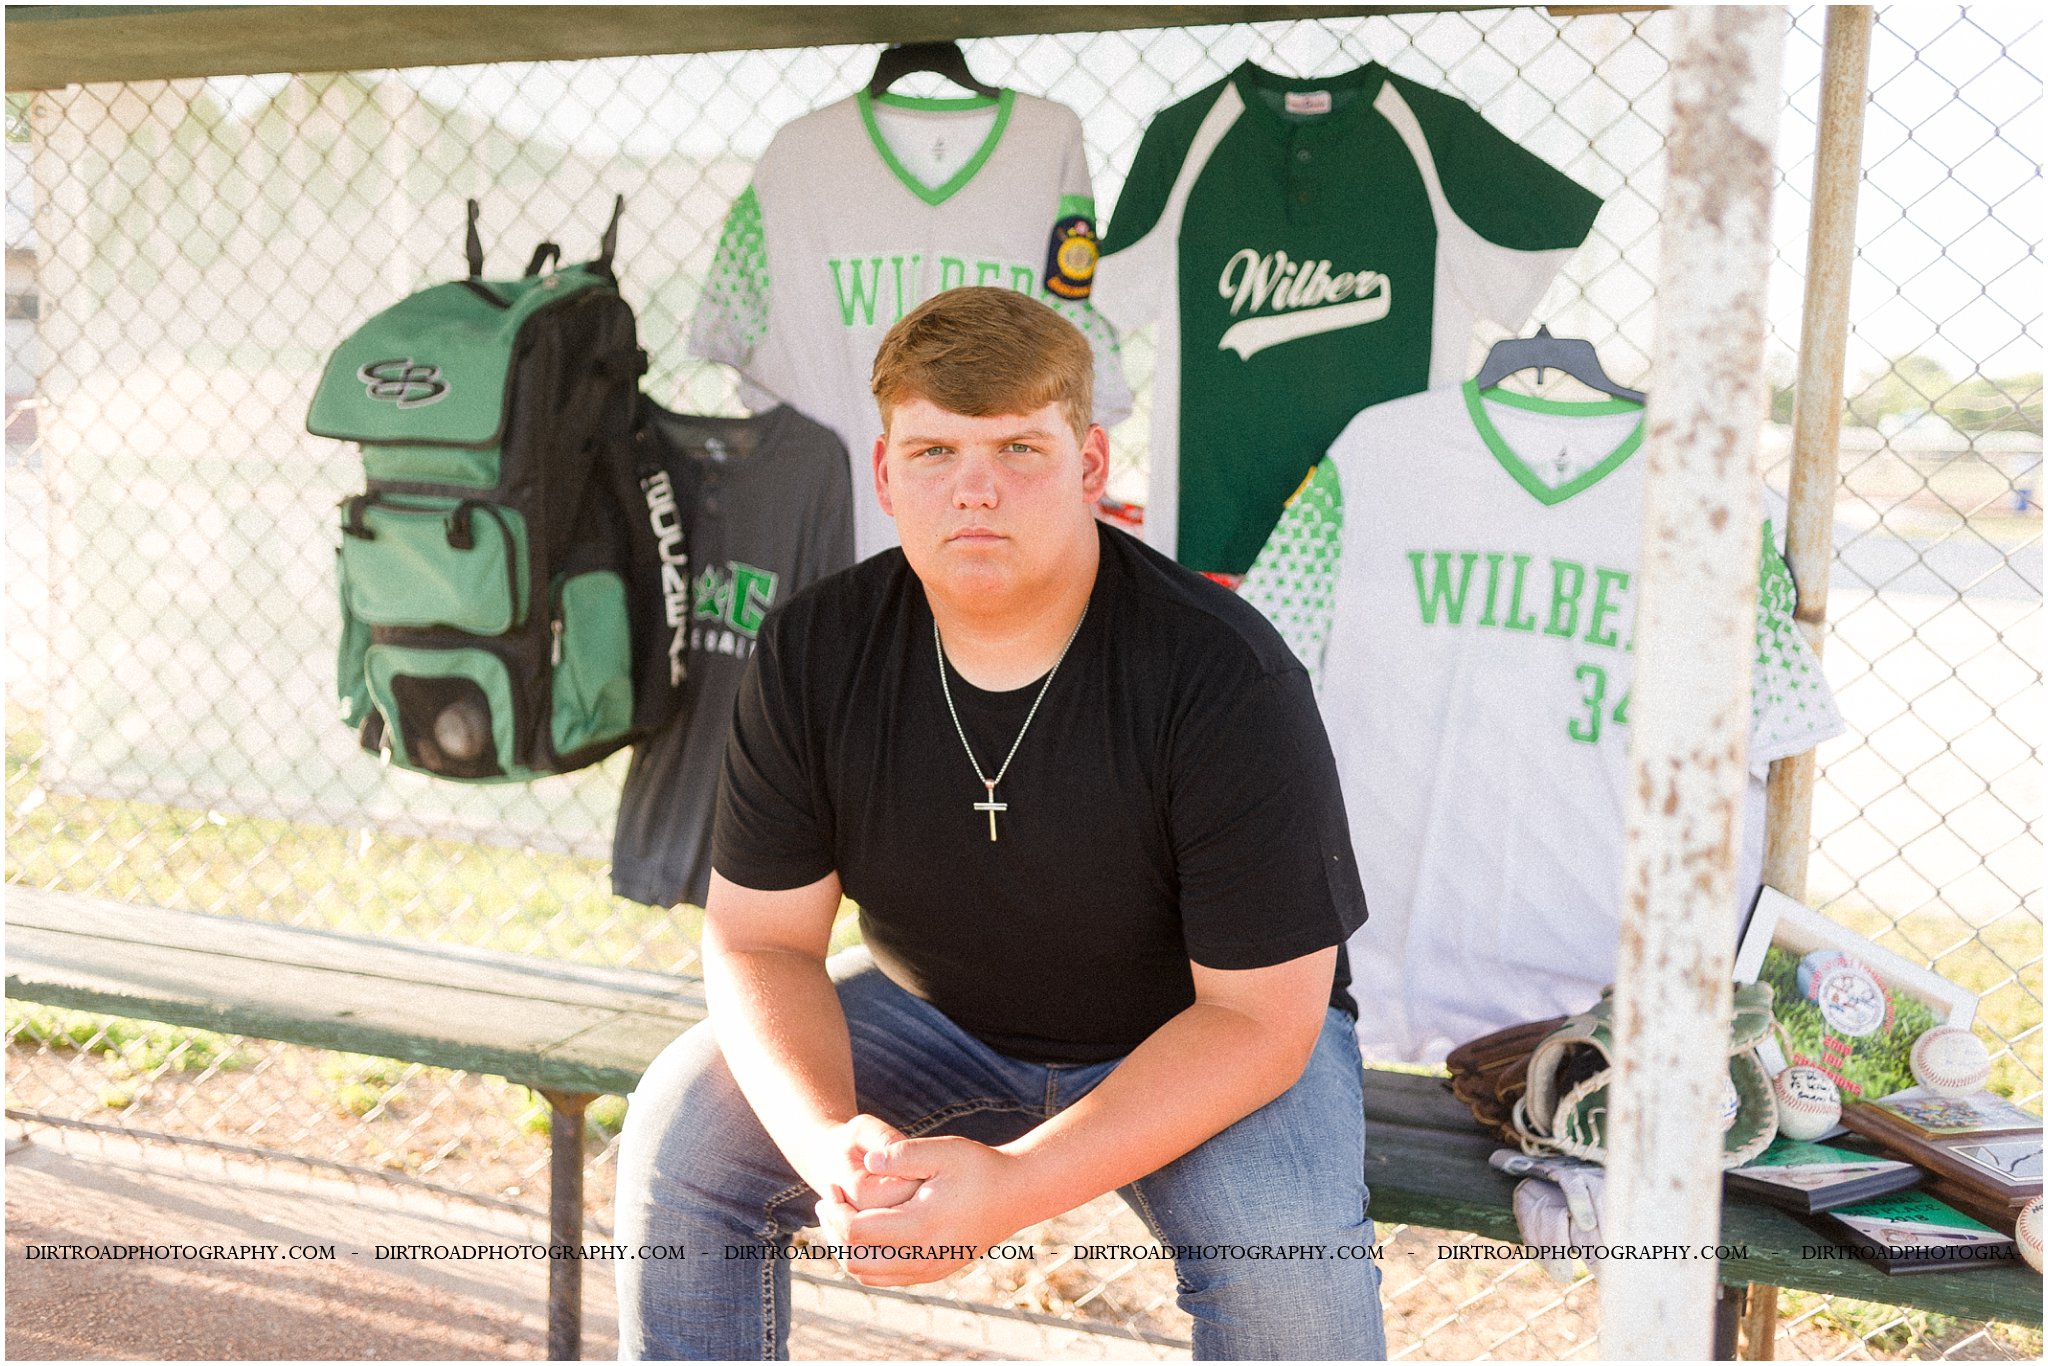 Take a look at Owen's baseball senior pictures. He's a local Nebraska senior who took his senior portraits on the ball field. Baseball senior pictures on a ball field at sunset.